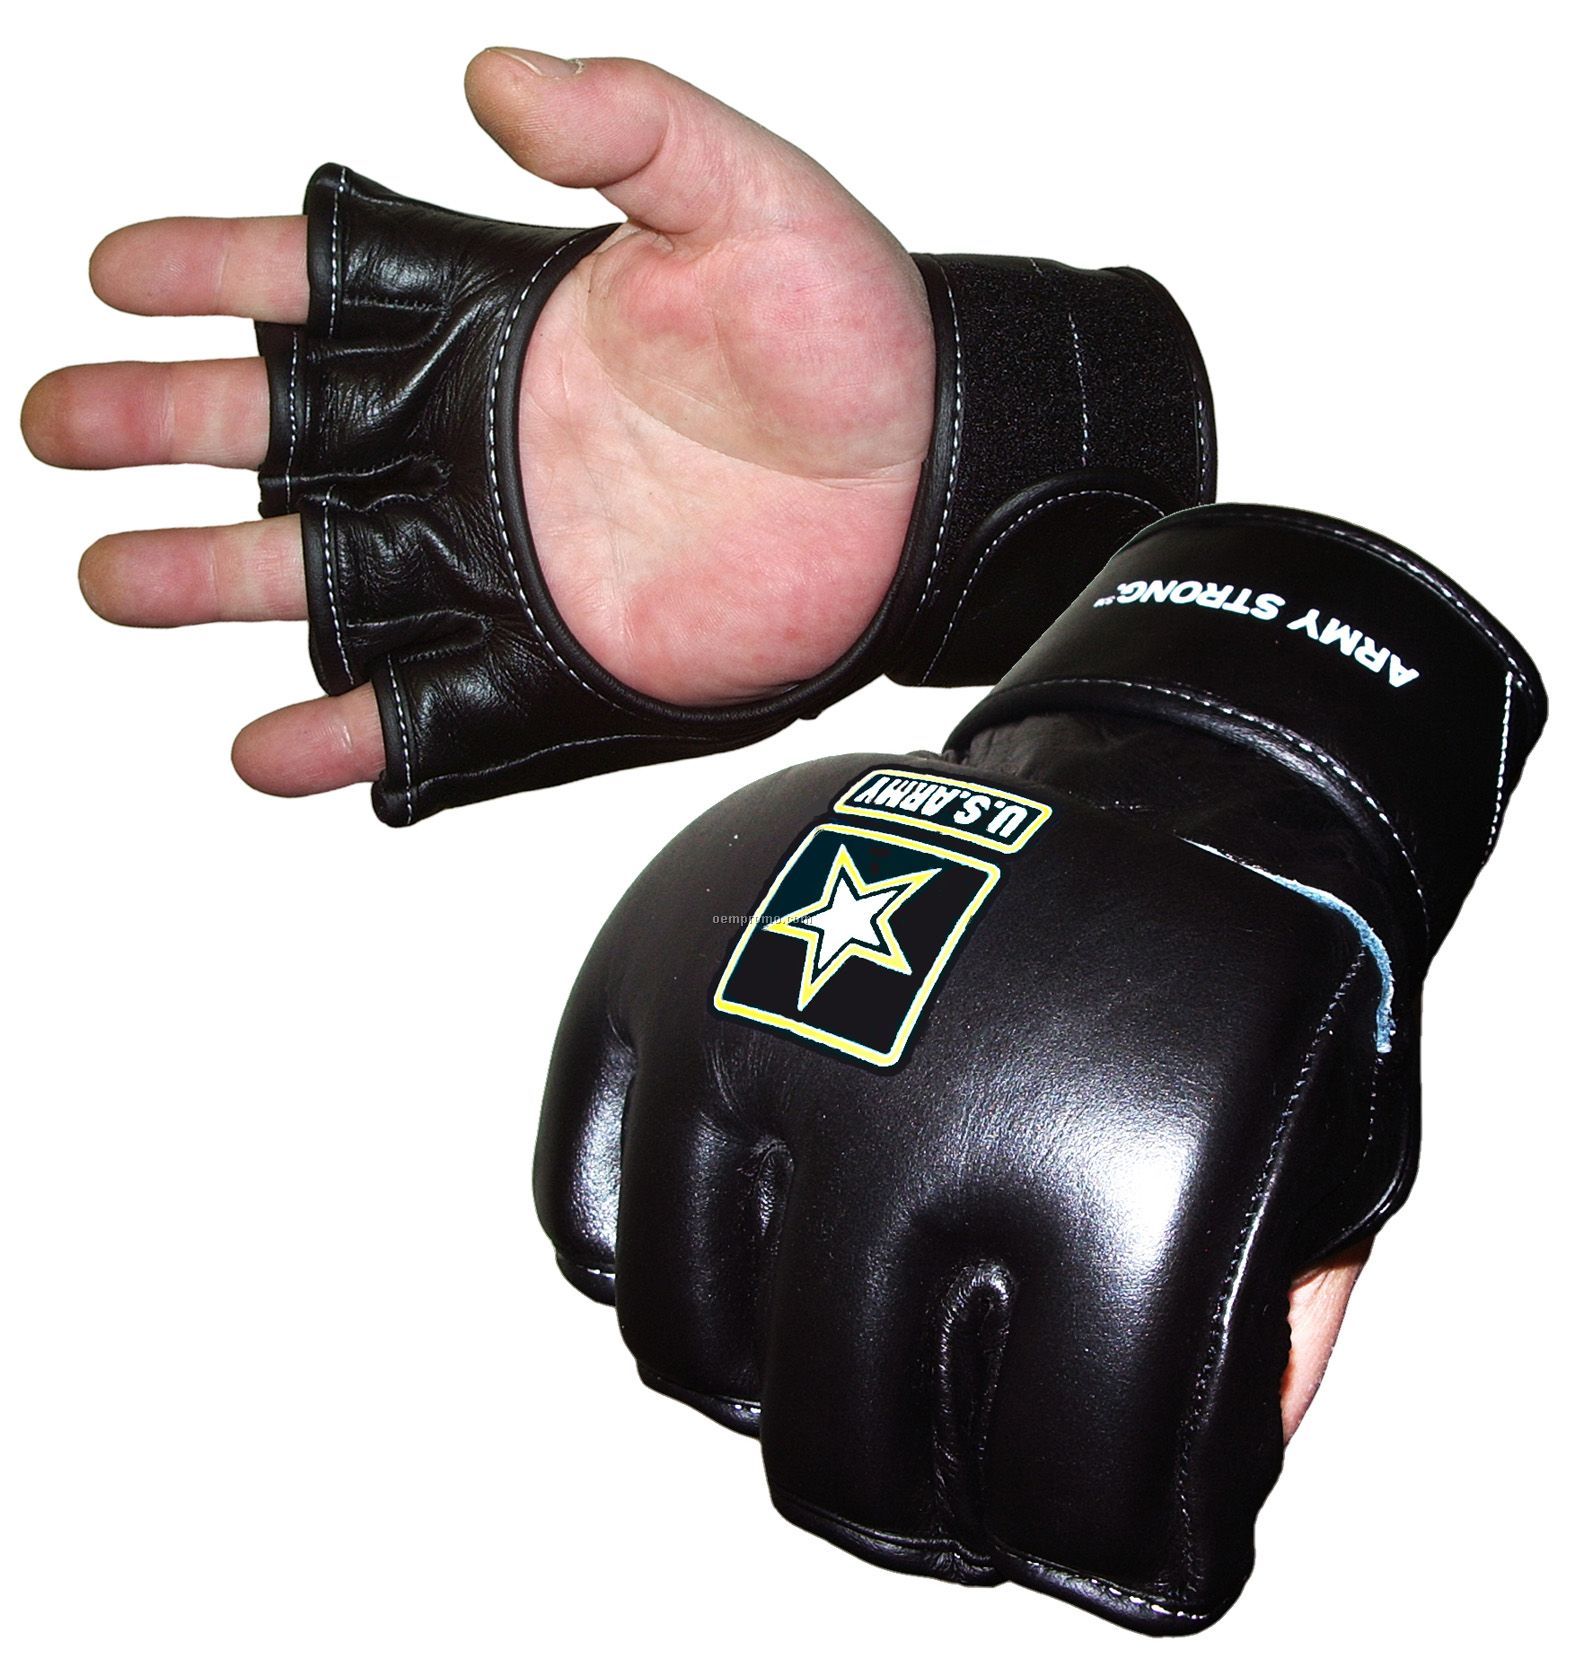 Mma Boxing Gloves, Genuine Leather